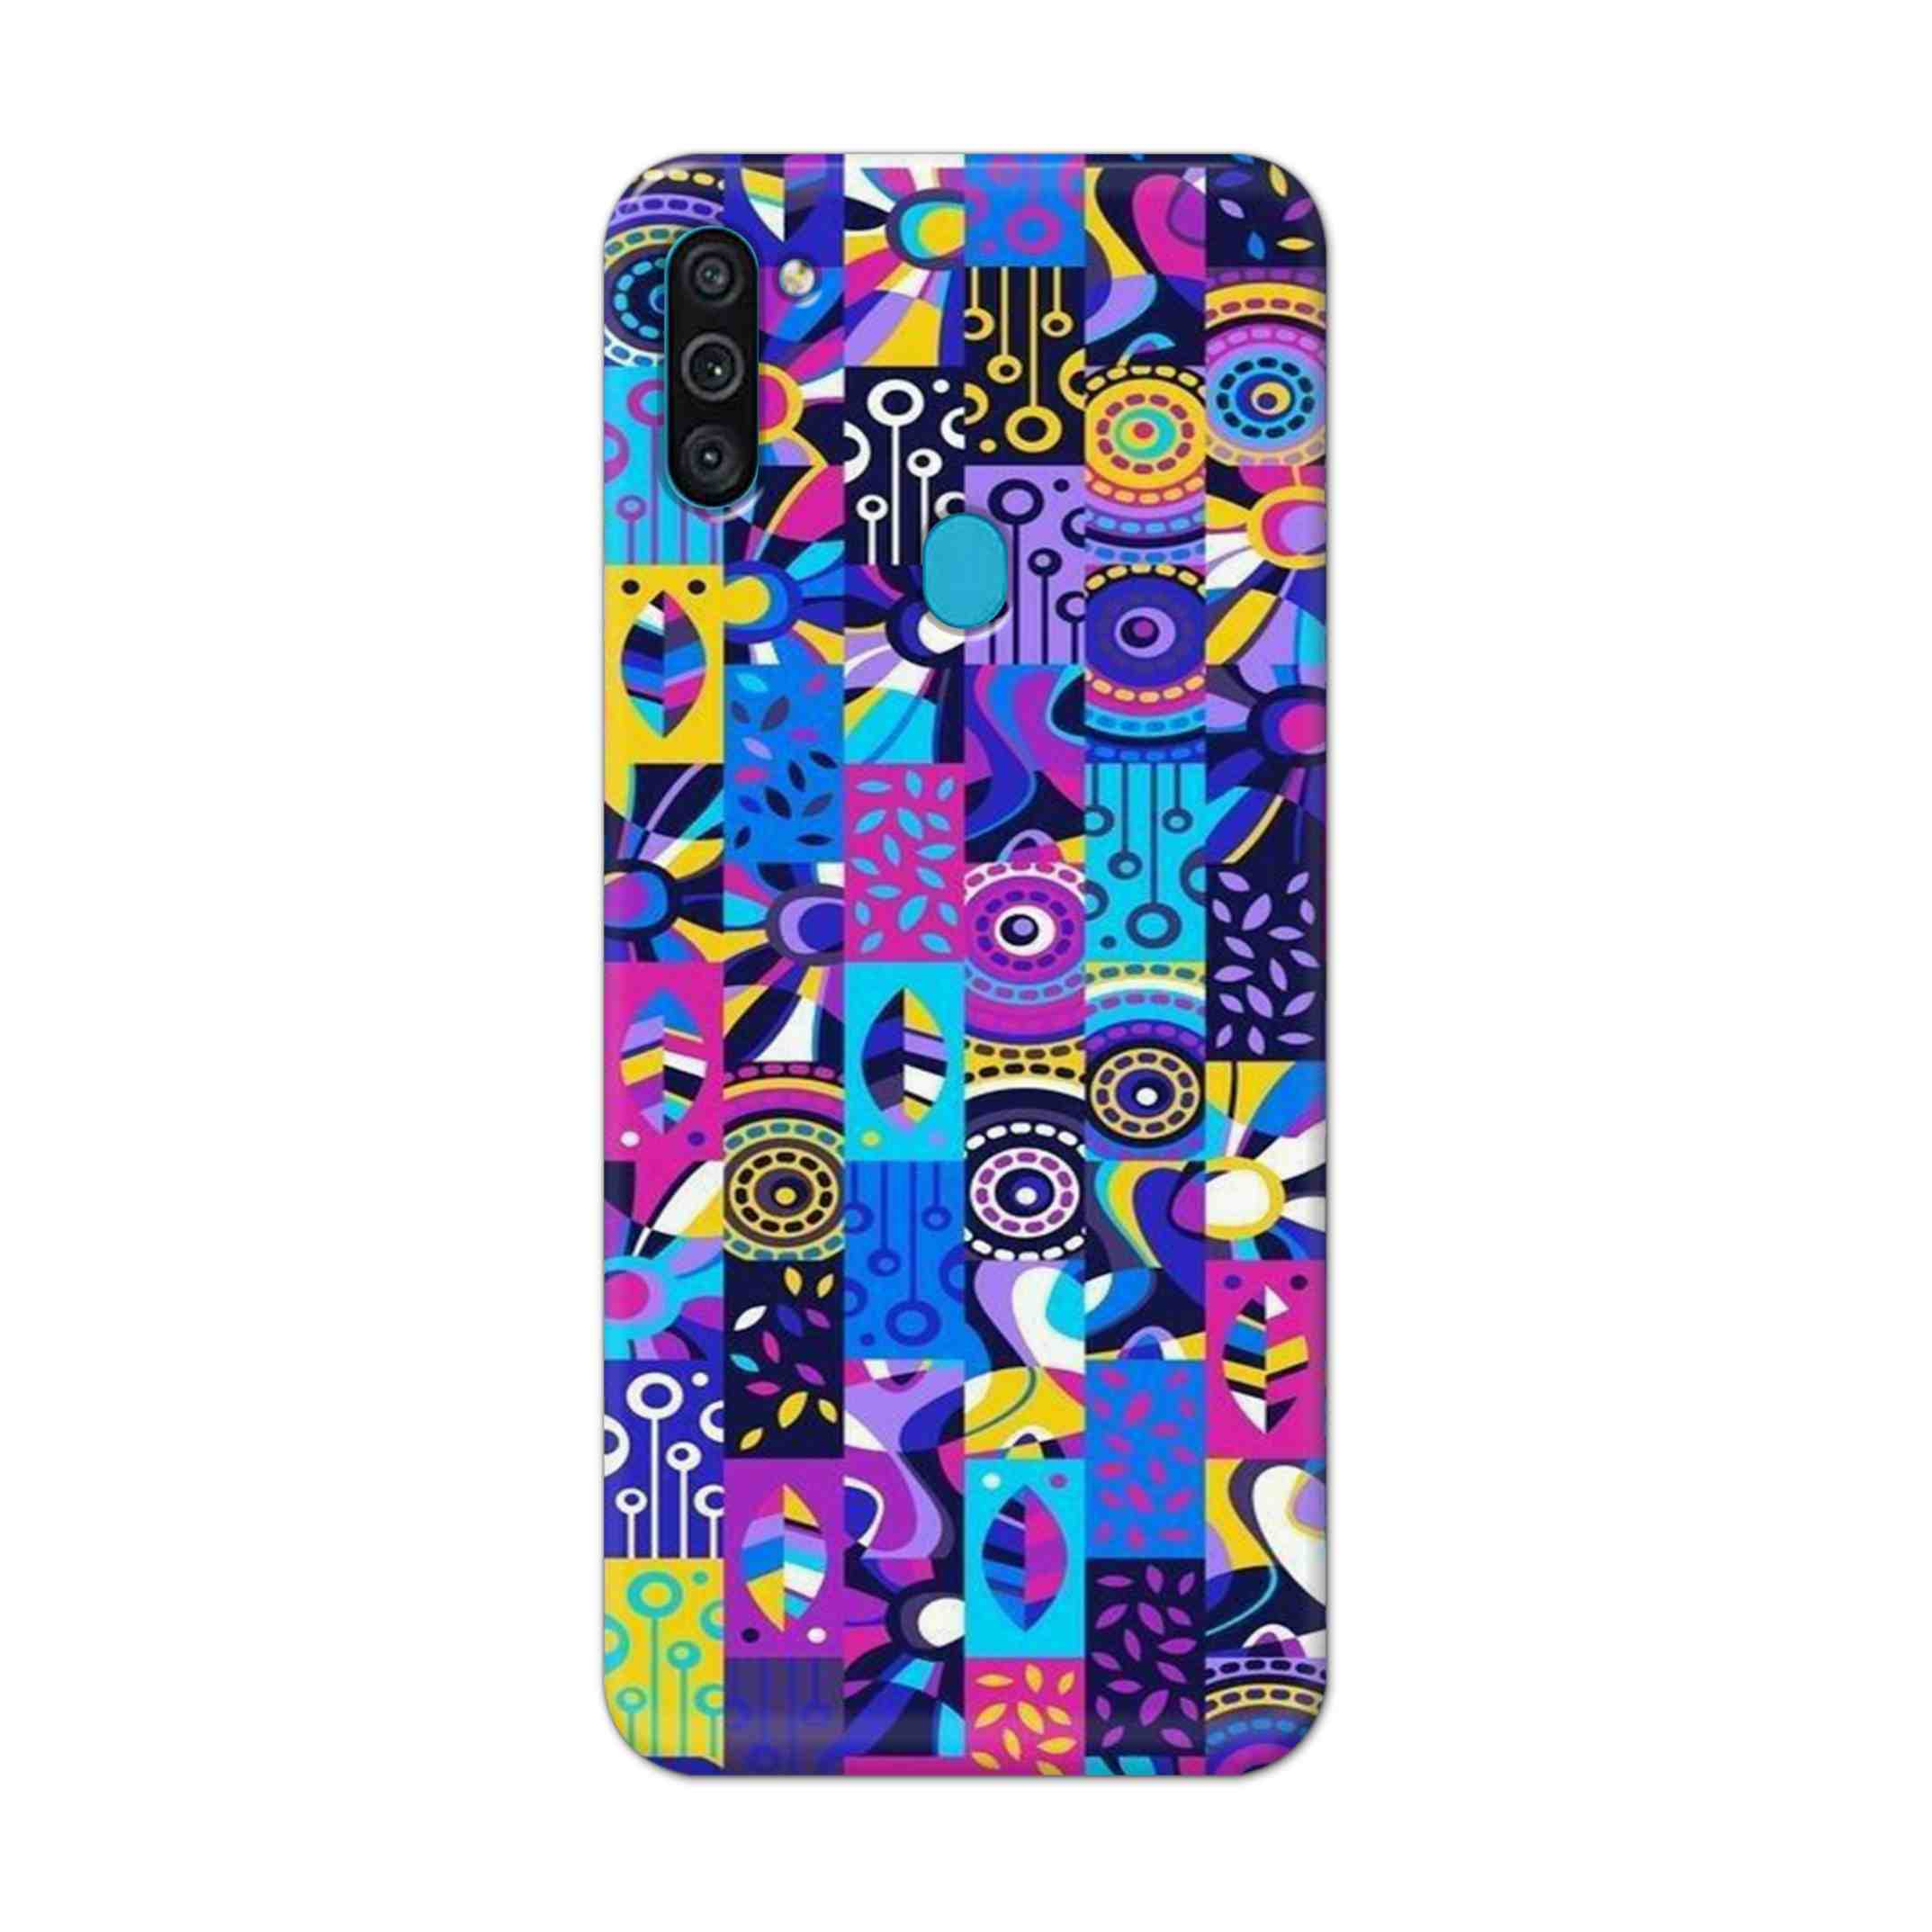 Buy Rainbow Art Hard Back Mobile Phone Case Cover For Samsung Galaxy M11 Online